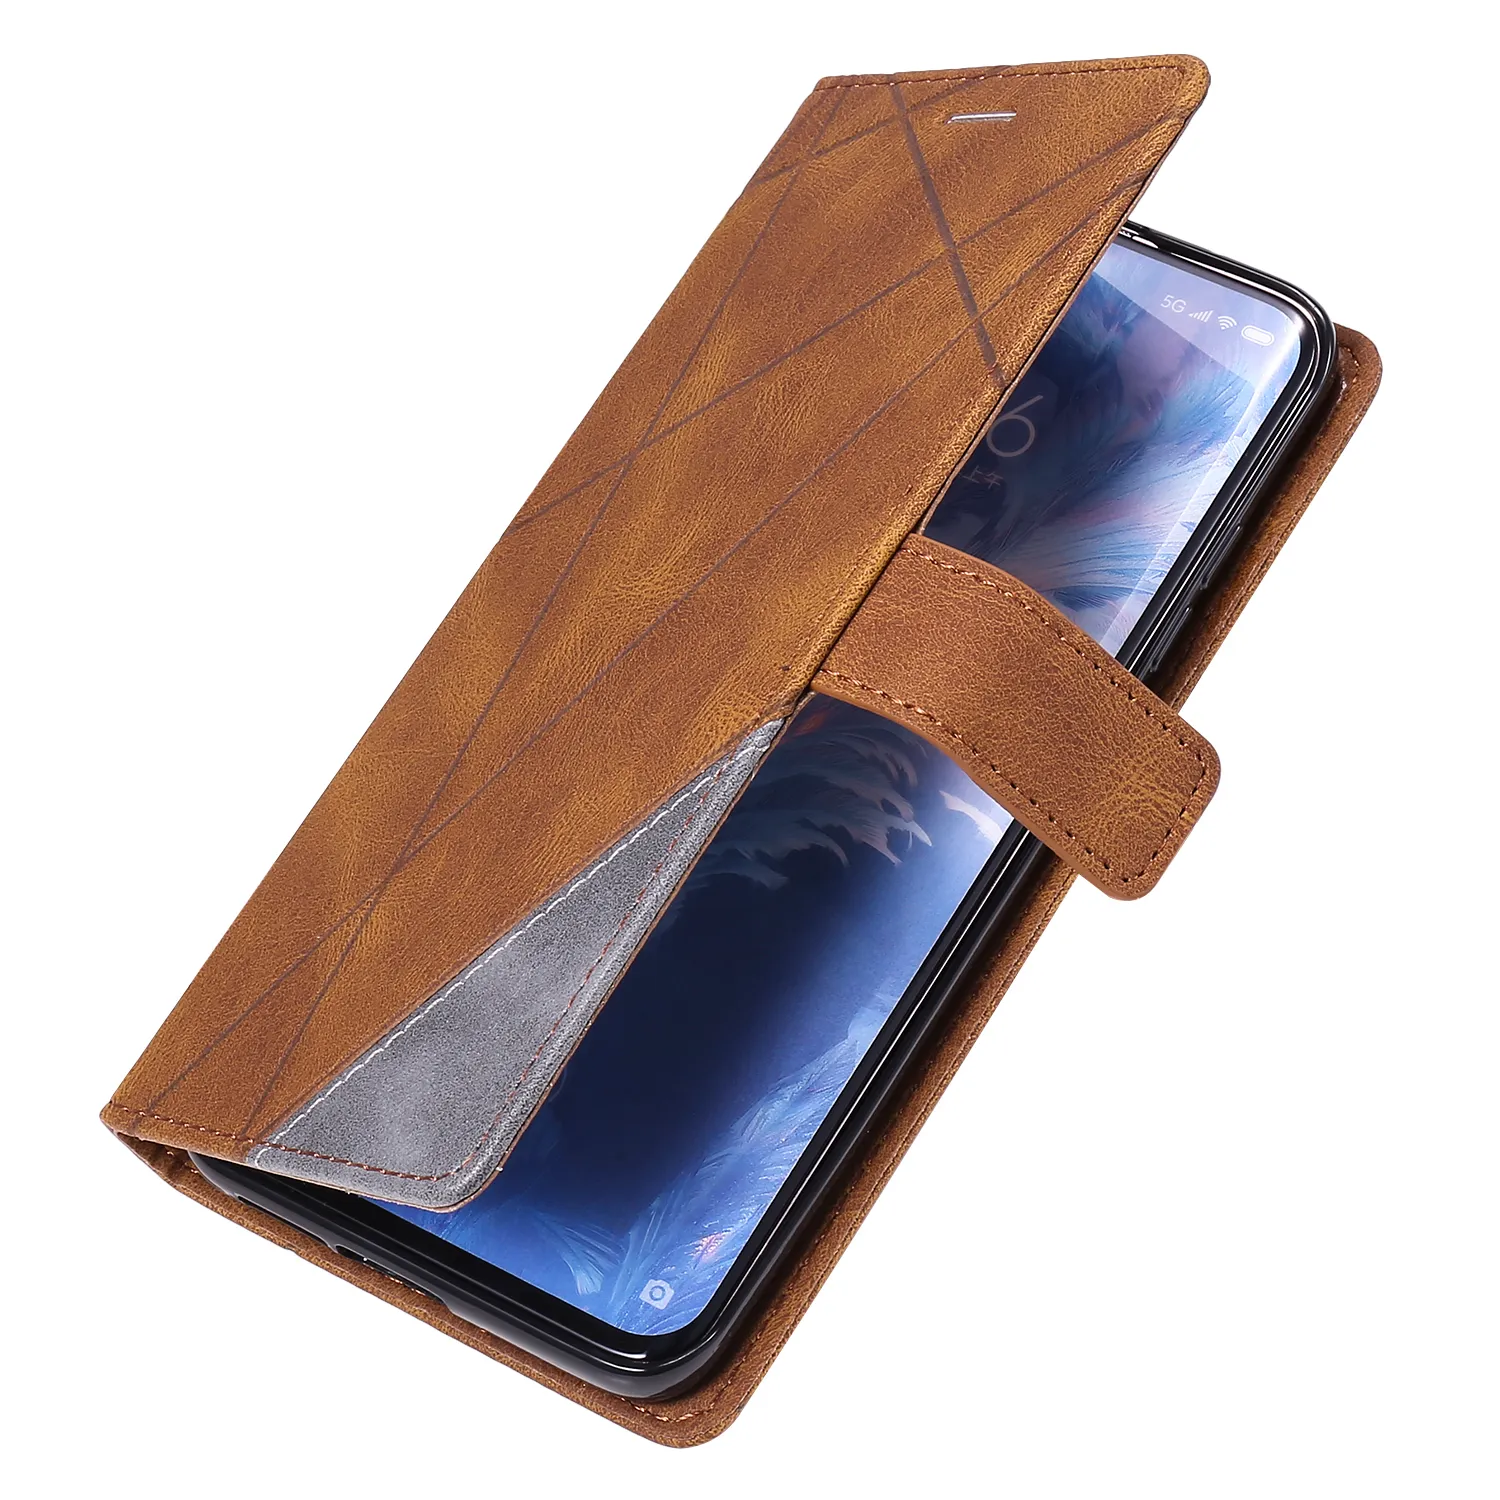 Leather Cases For Samsung Galaxy A01 A02S A10S A11 A12 A20 A21 A32 A40 A41 A50 A51 A52 A70 A71 A72 A91 Phone Stand Cover Bag